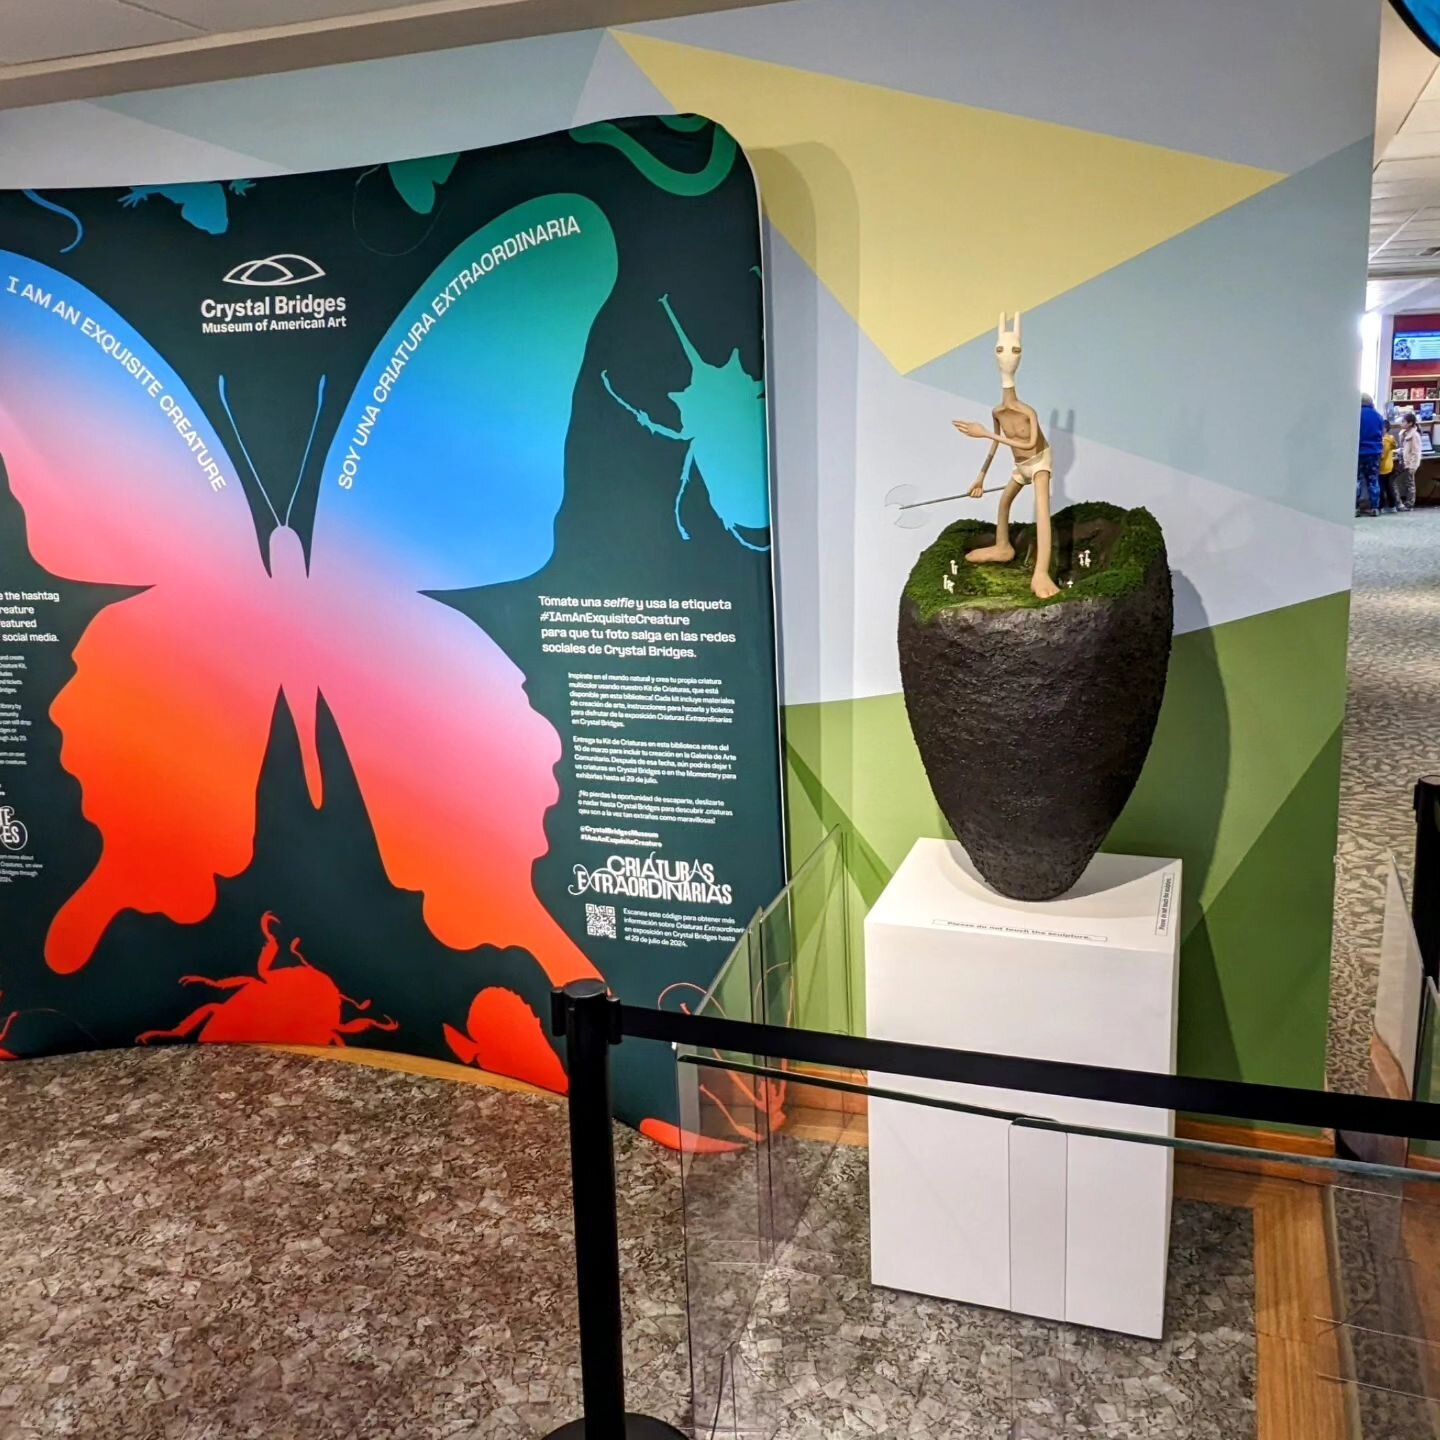 WARRIOR has just been installed at Springdale Public Library!&nbsp; In collaboration with Crystal Bridges Museum, &quot;Warrior&quot; has been chosen to inspire our community to think about their own exquisite creature and get people excited about th